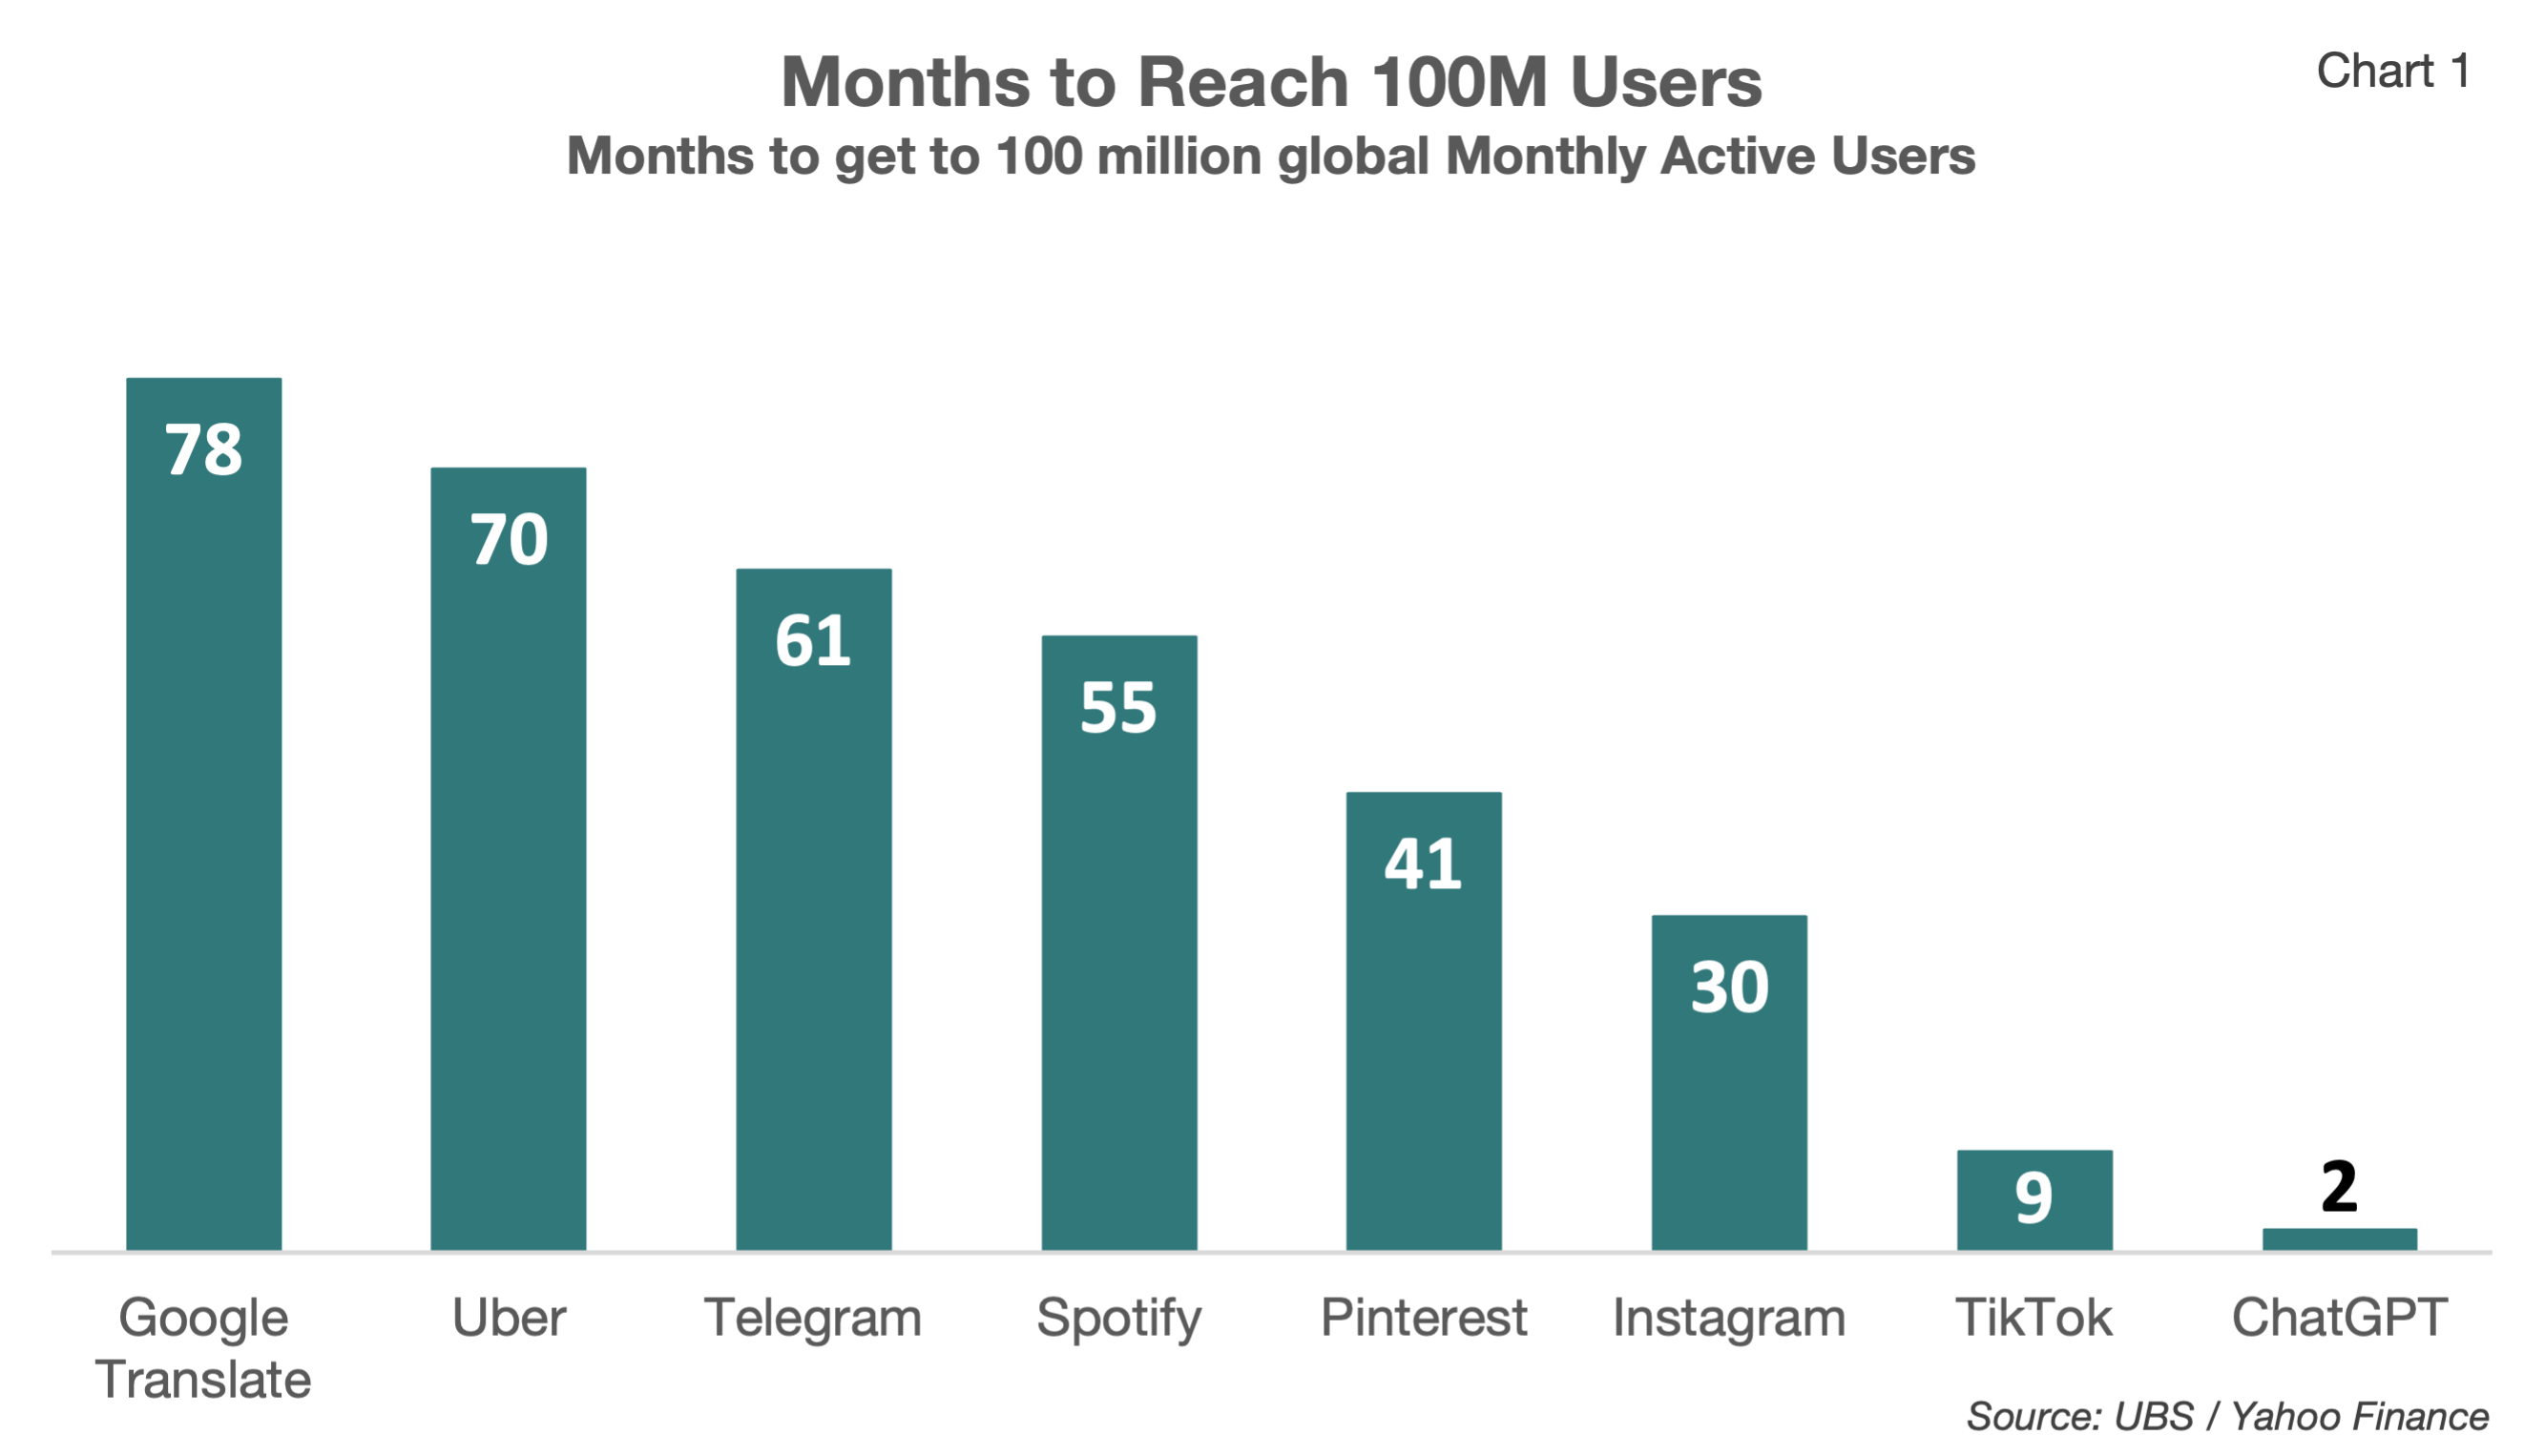 Chart showing the rate of apps reaching 100 million users showing ChatGPT is the fastest at 2 months